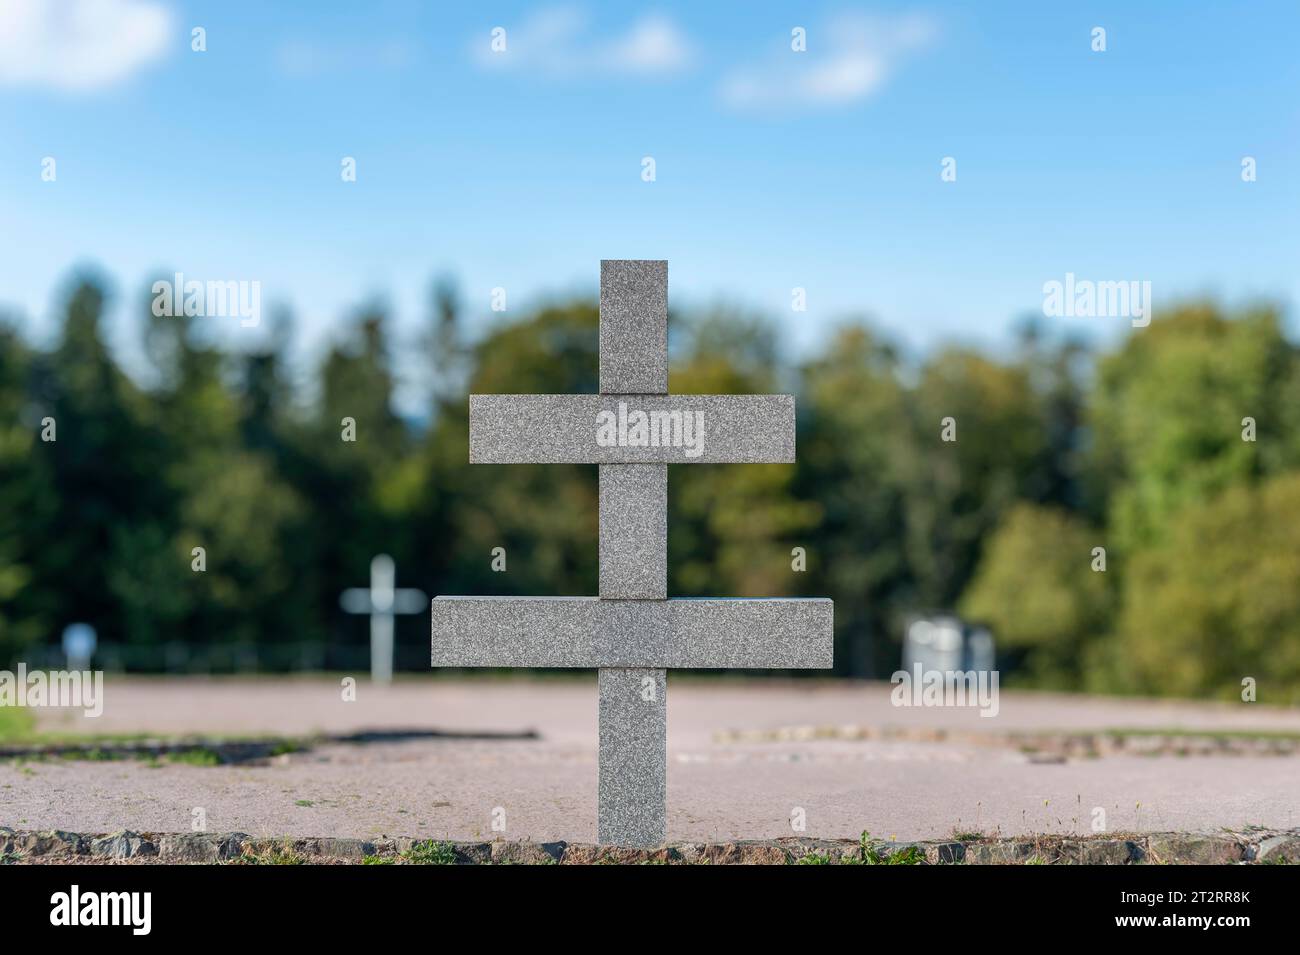 Cross of Lorraine or Patriarch's Cross in the former concentration camp Natzweiler-Struthof, Natzwiller, Alsace, France Stock Photo